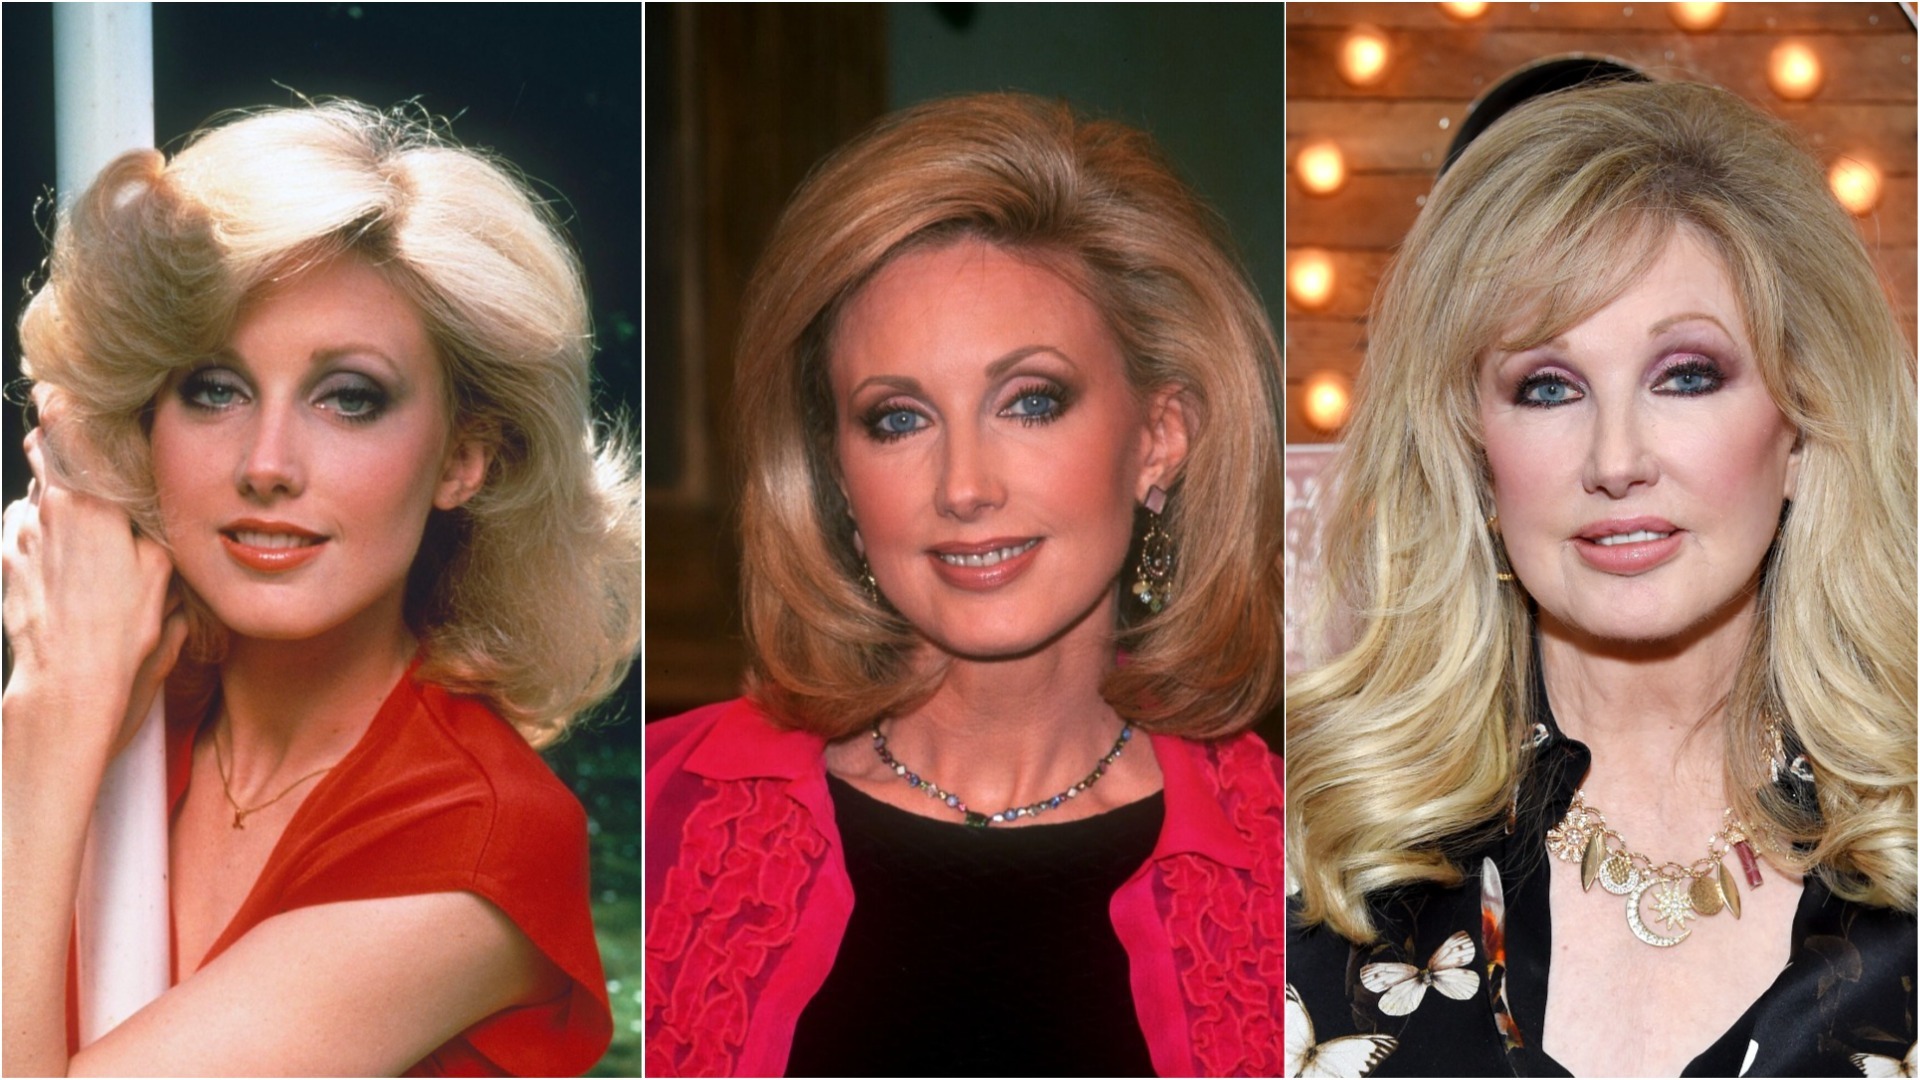 Vintage Gay Porn Morgan - Here's What Happened to Actress Morgan Fairchild